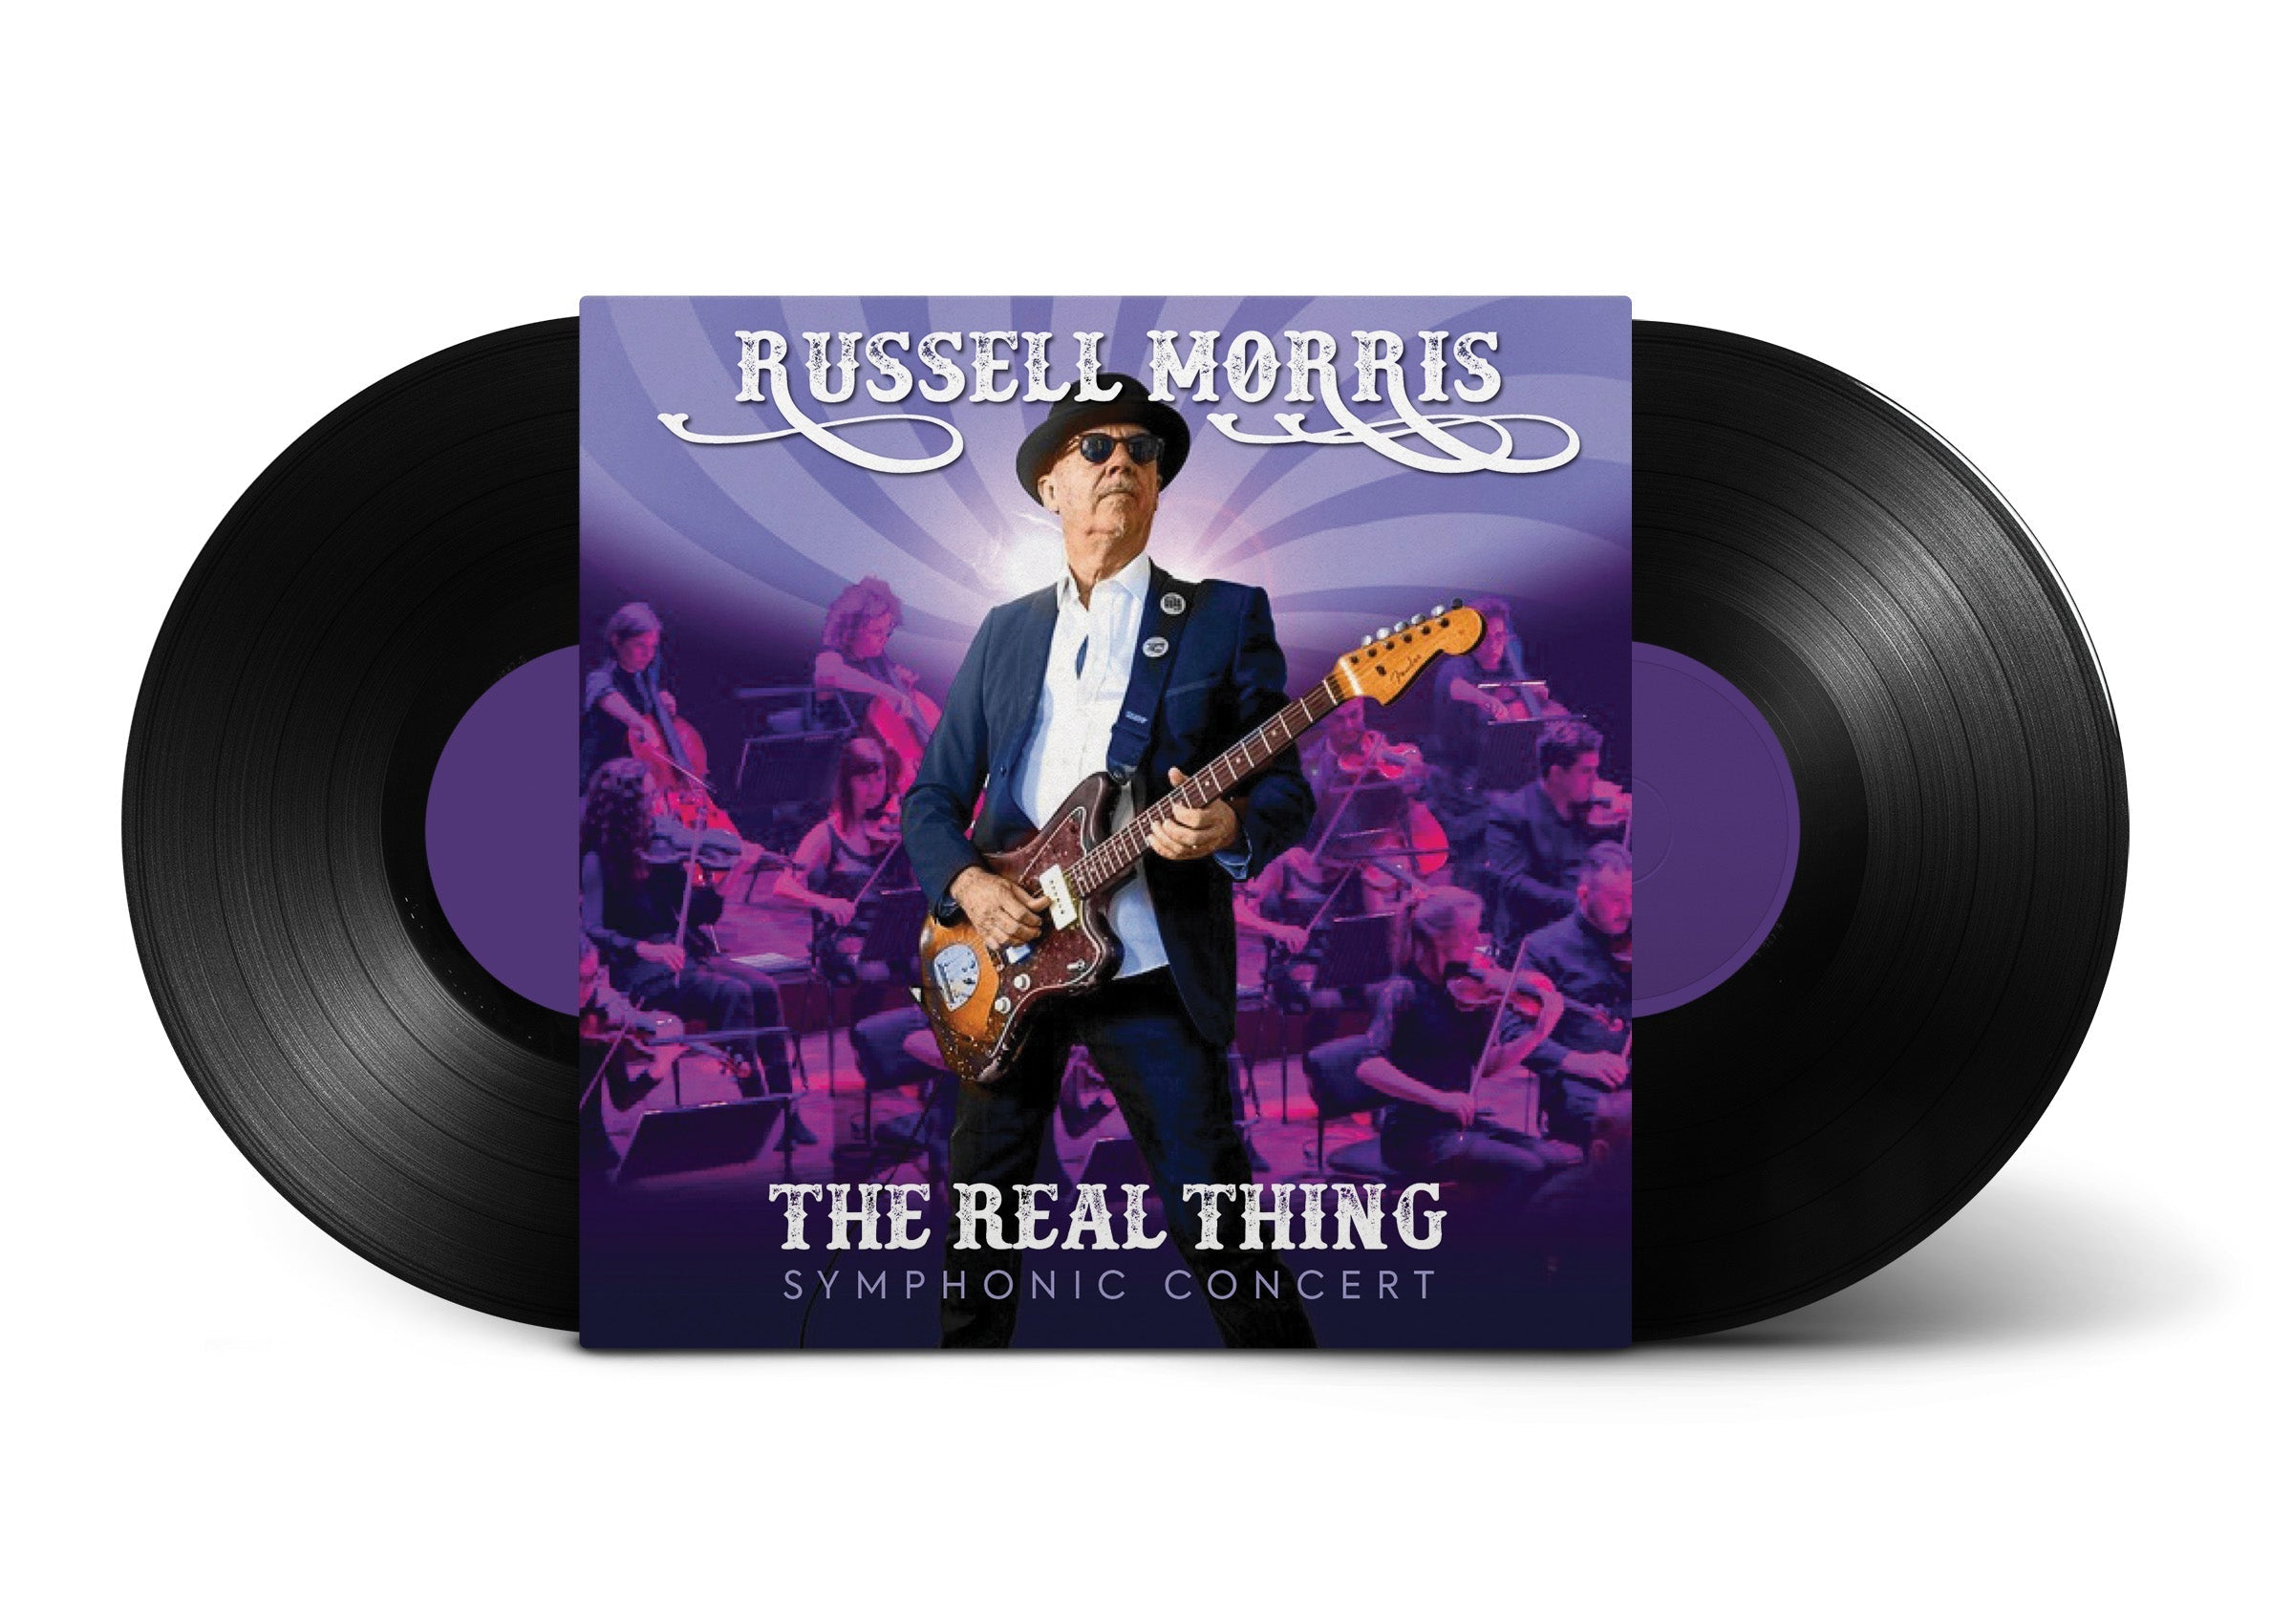 RUSSELL MORRIS - THE REAL THING (SYMPHONIC CONCERT) (2LP + CAREER PROGRAM)